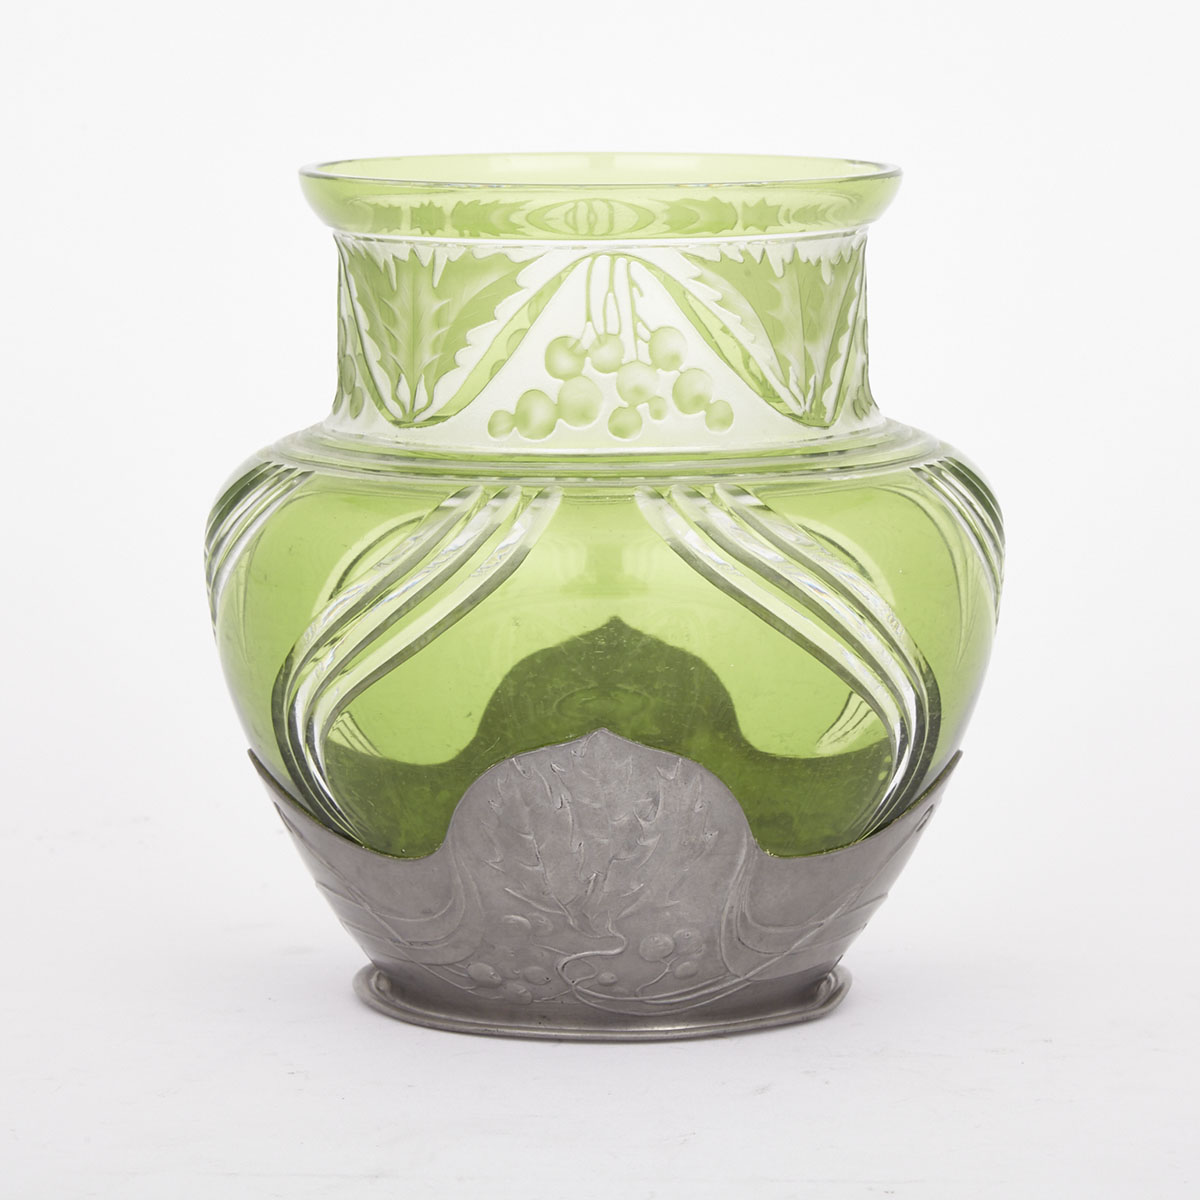 ‘Orivit’ Pewter Mounted Green Overlaid and Cut Glass Vase, early 20th century